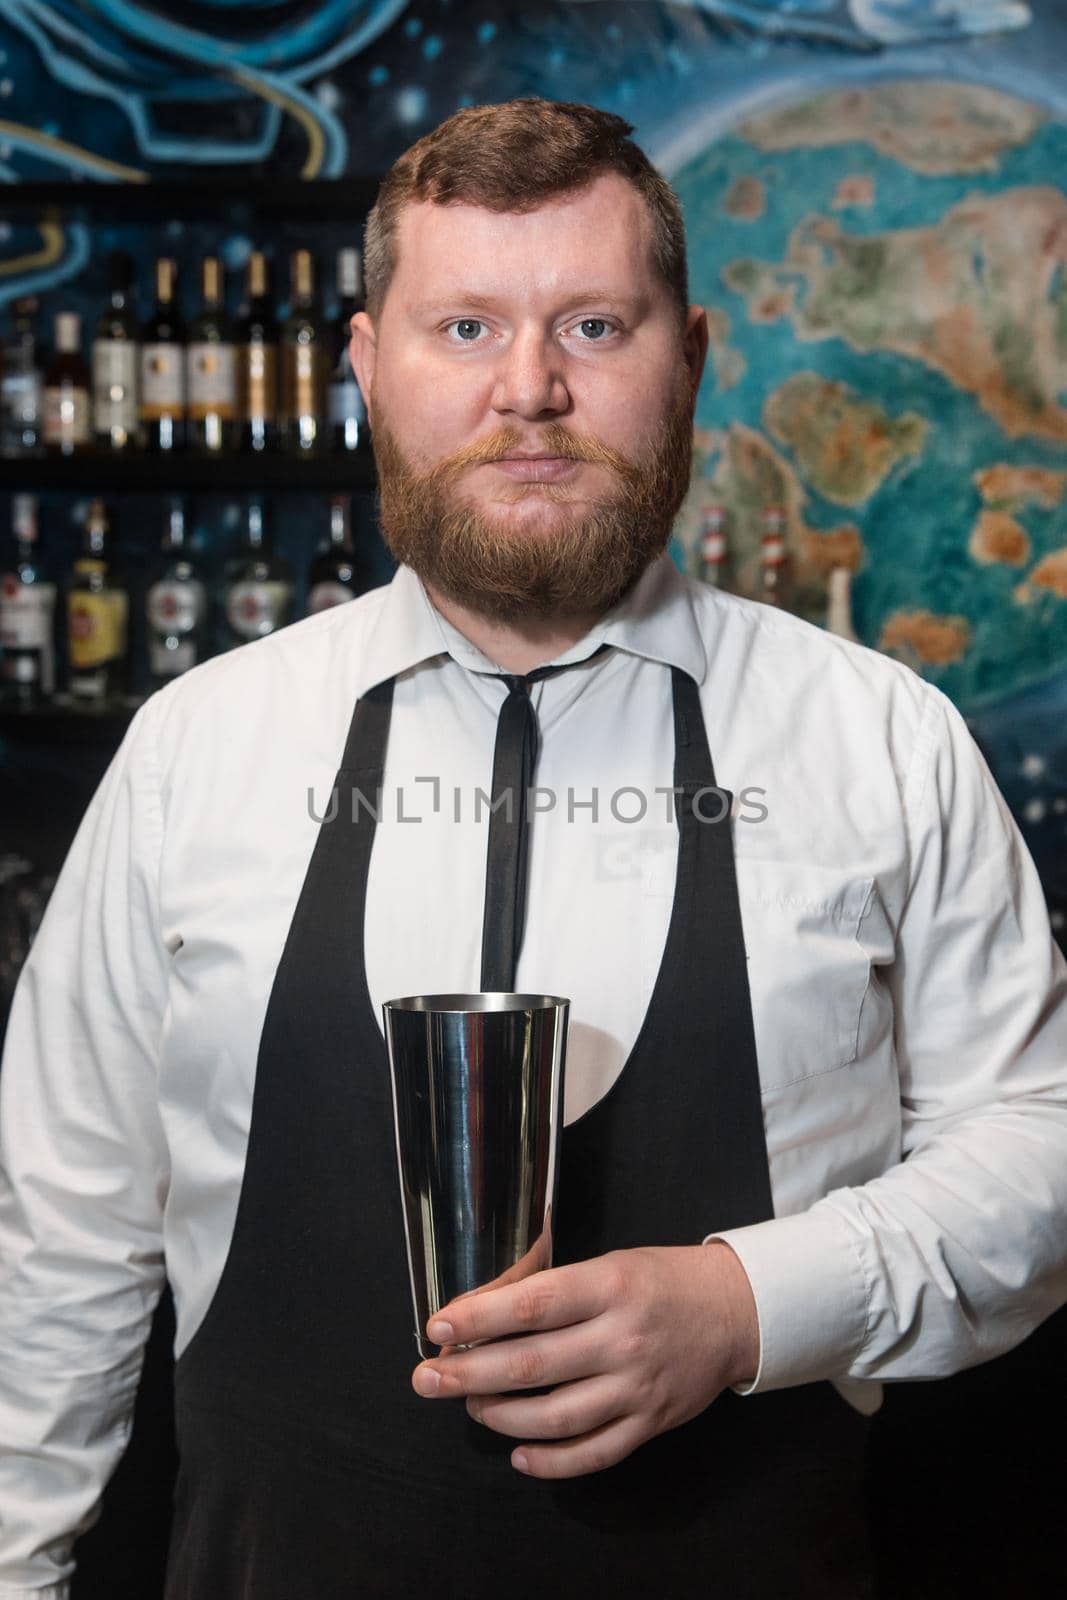 A bearded adult man of European appearance, a professional bartender, holds in his hands a tool for preparing and mixing alcoholic cocktails in a nightclub.